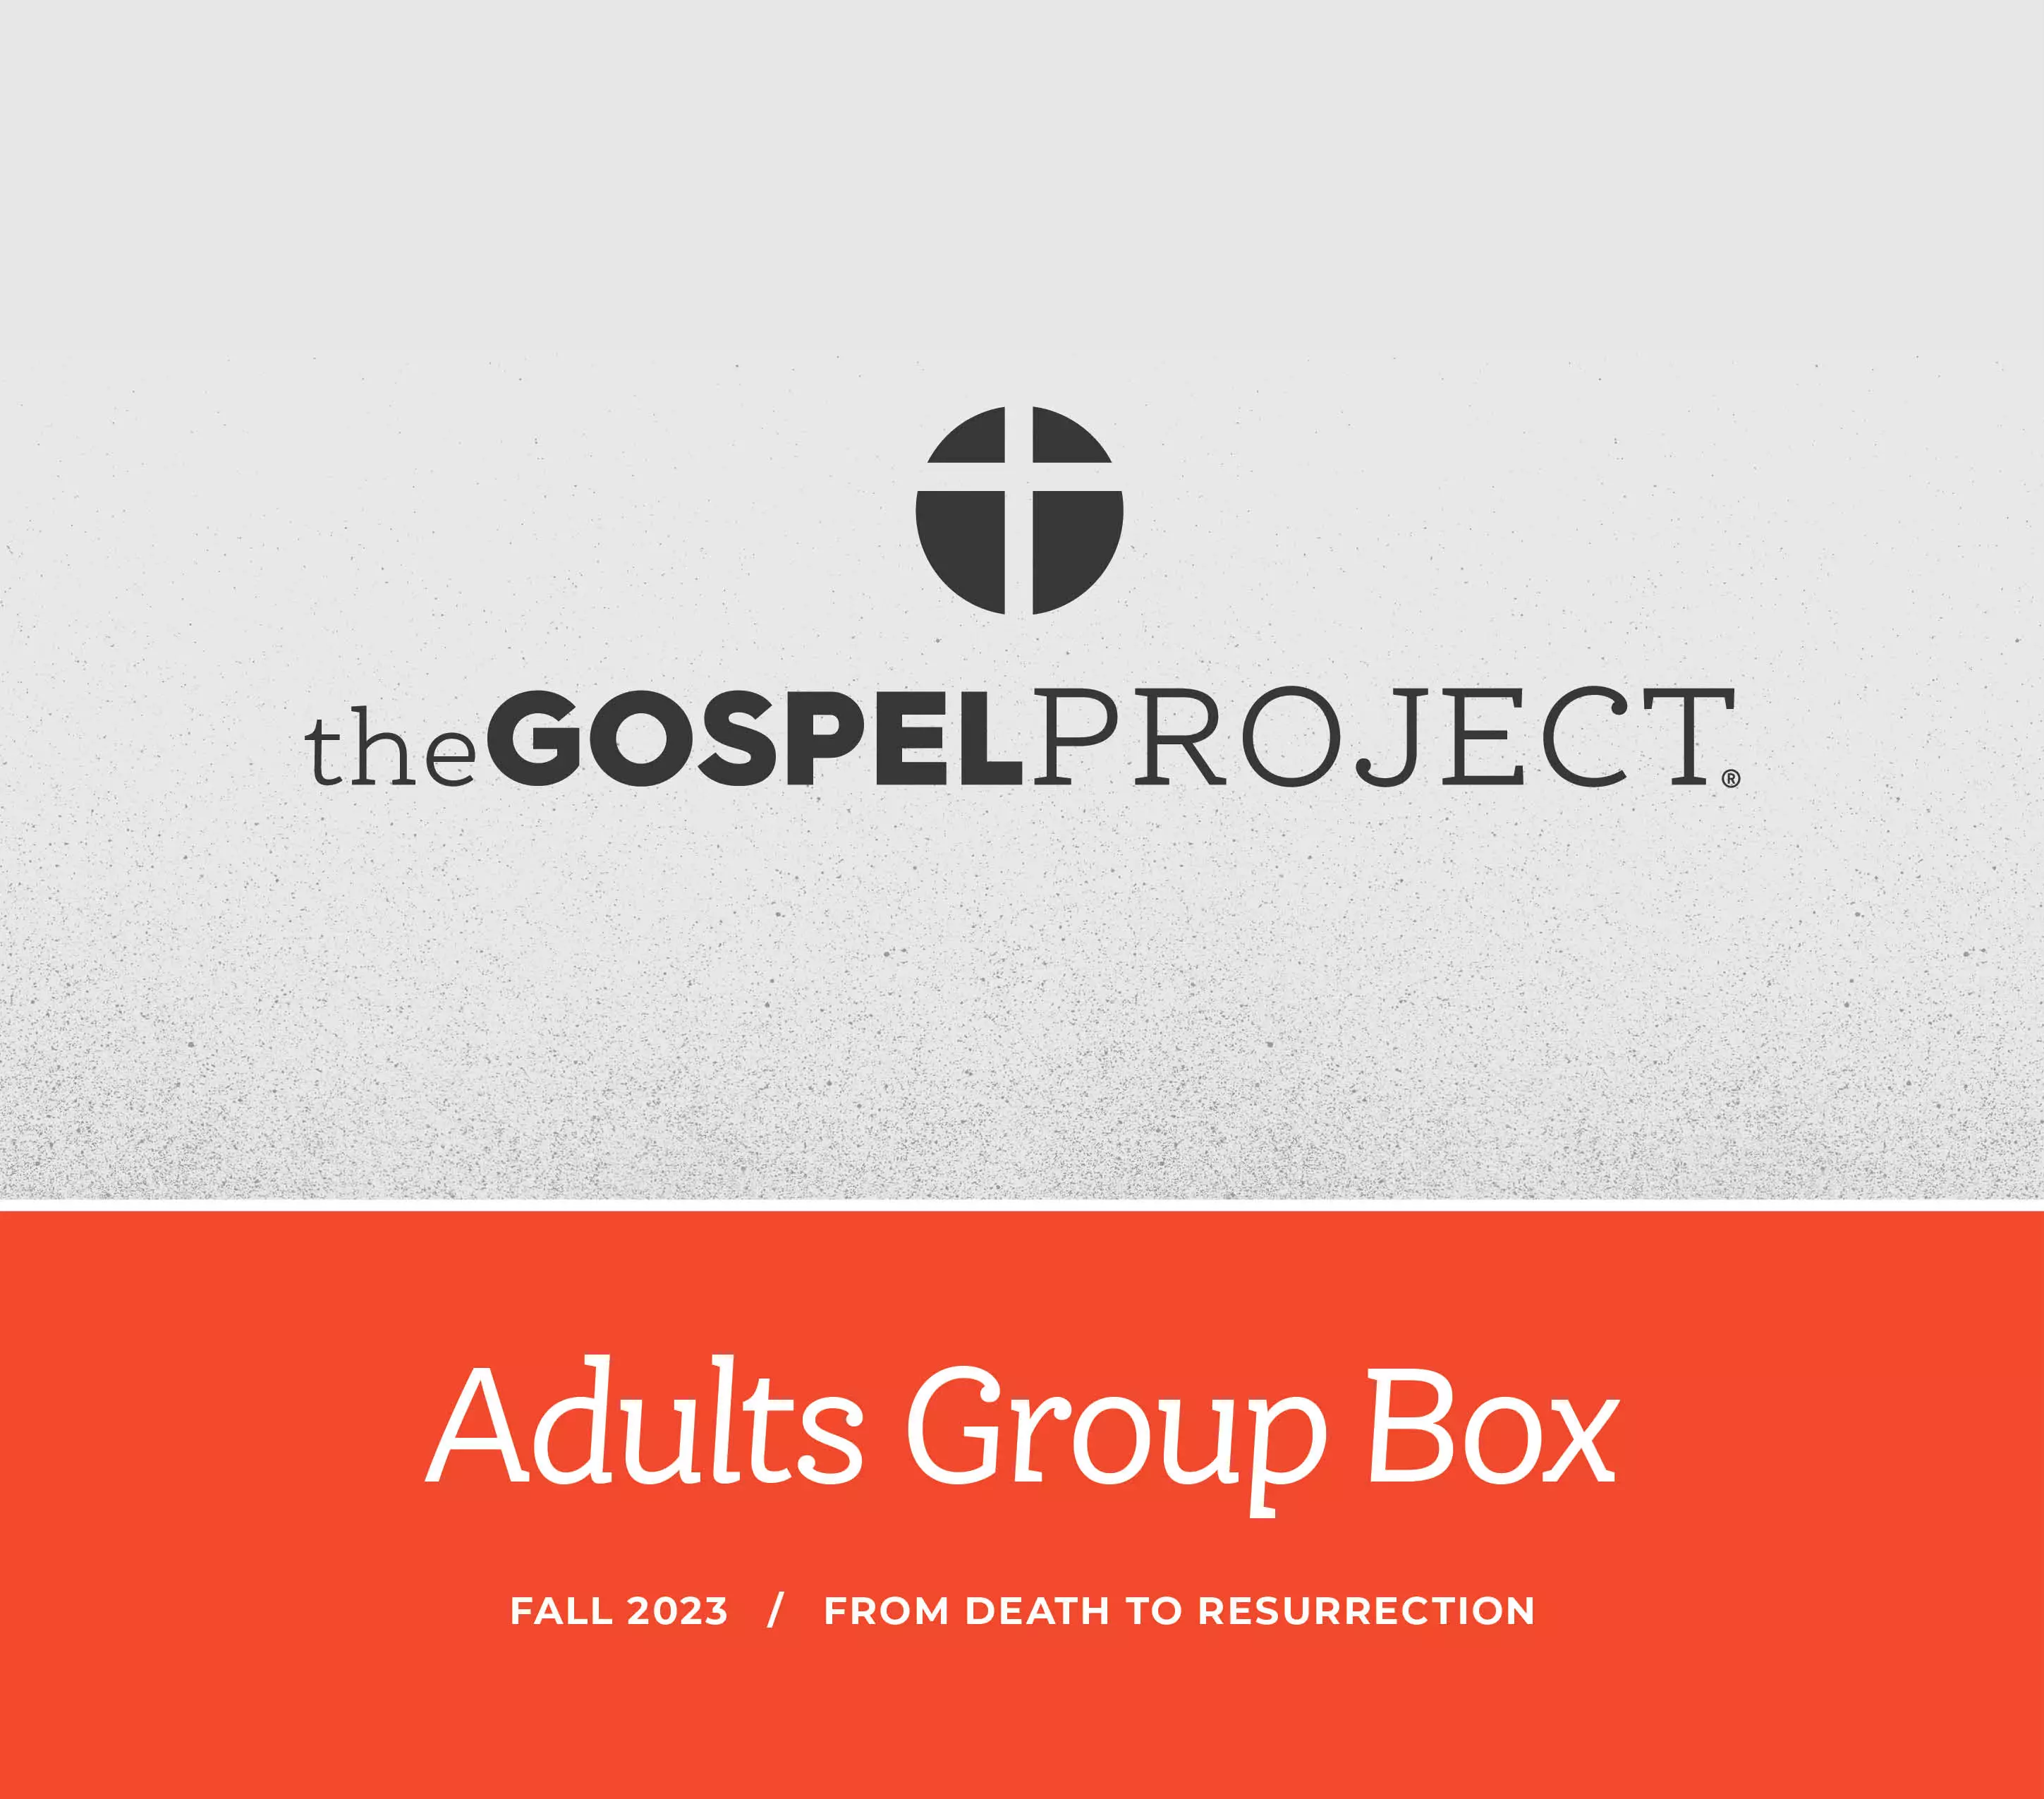 Gospel Project for Adults: Adult Group Box CSB - Fall 2023